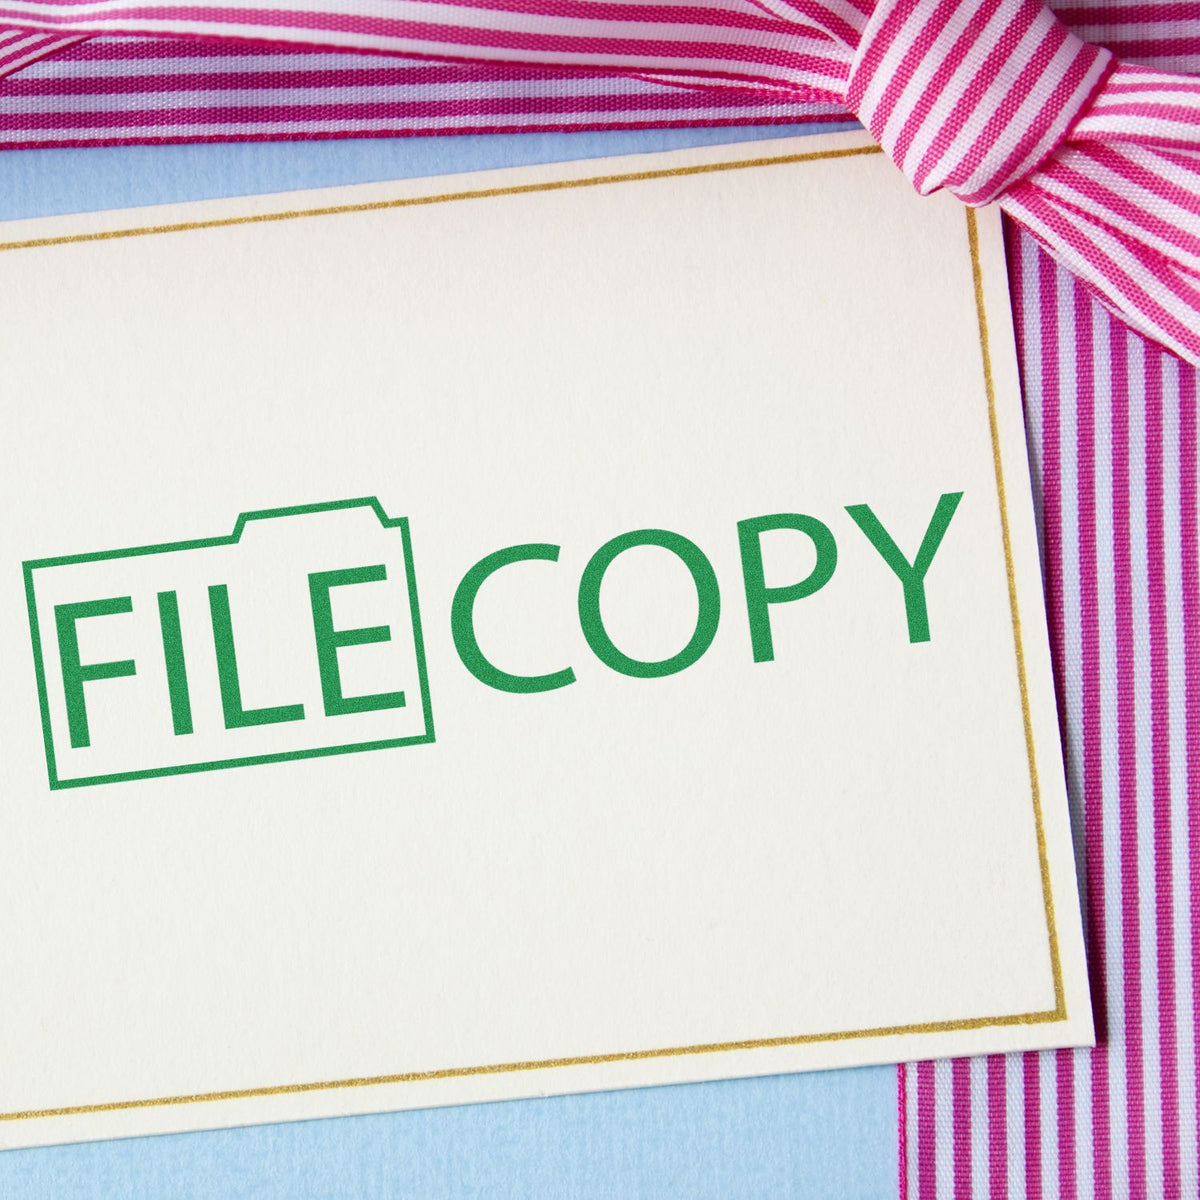 Self-Inking File Copy with Folder Stamp In Use